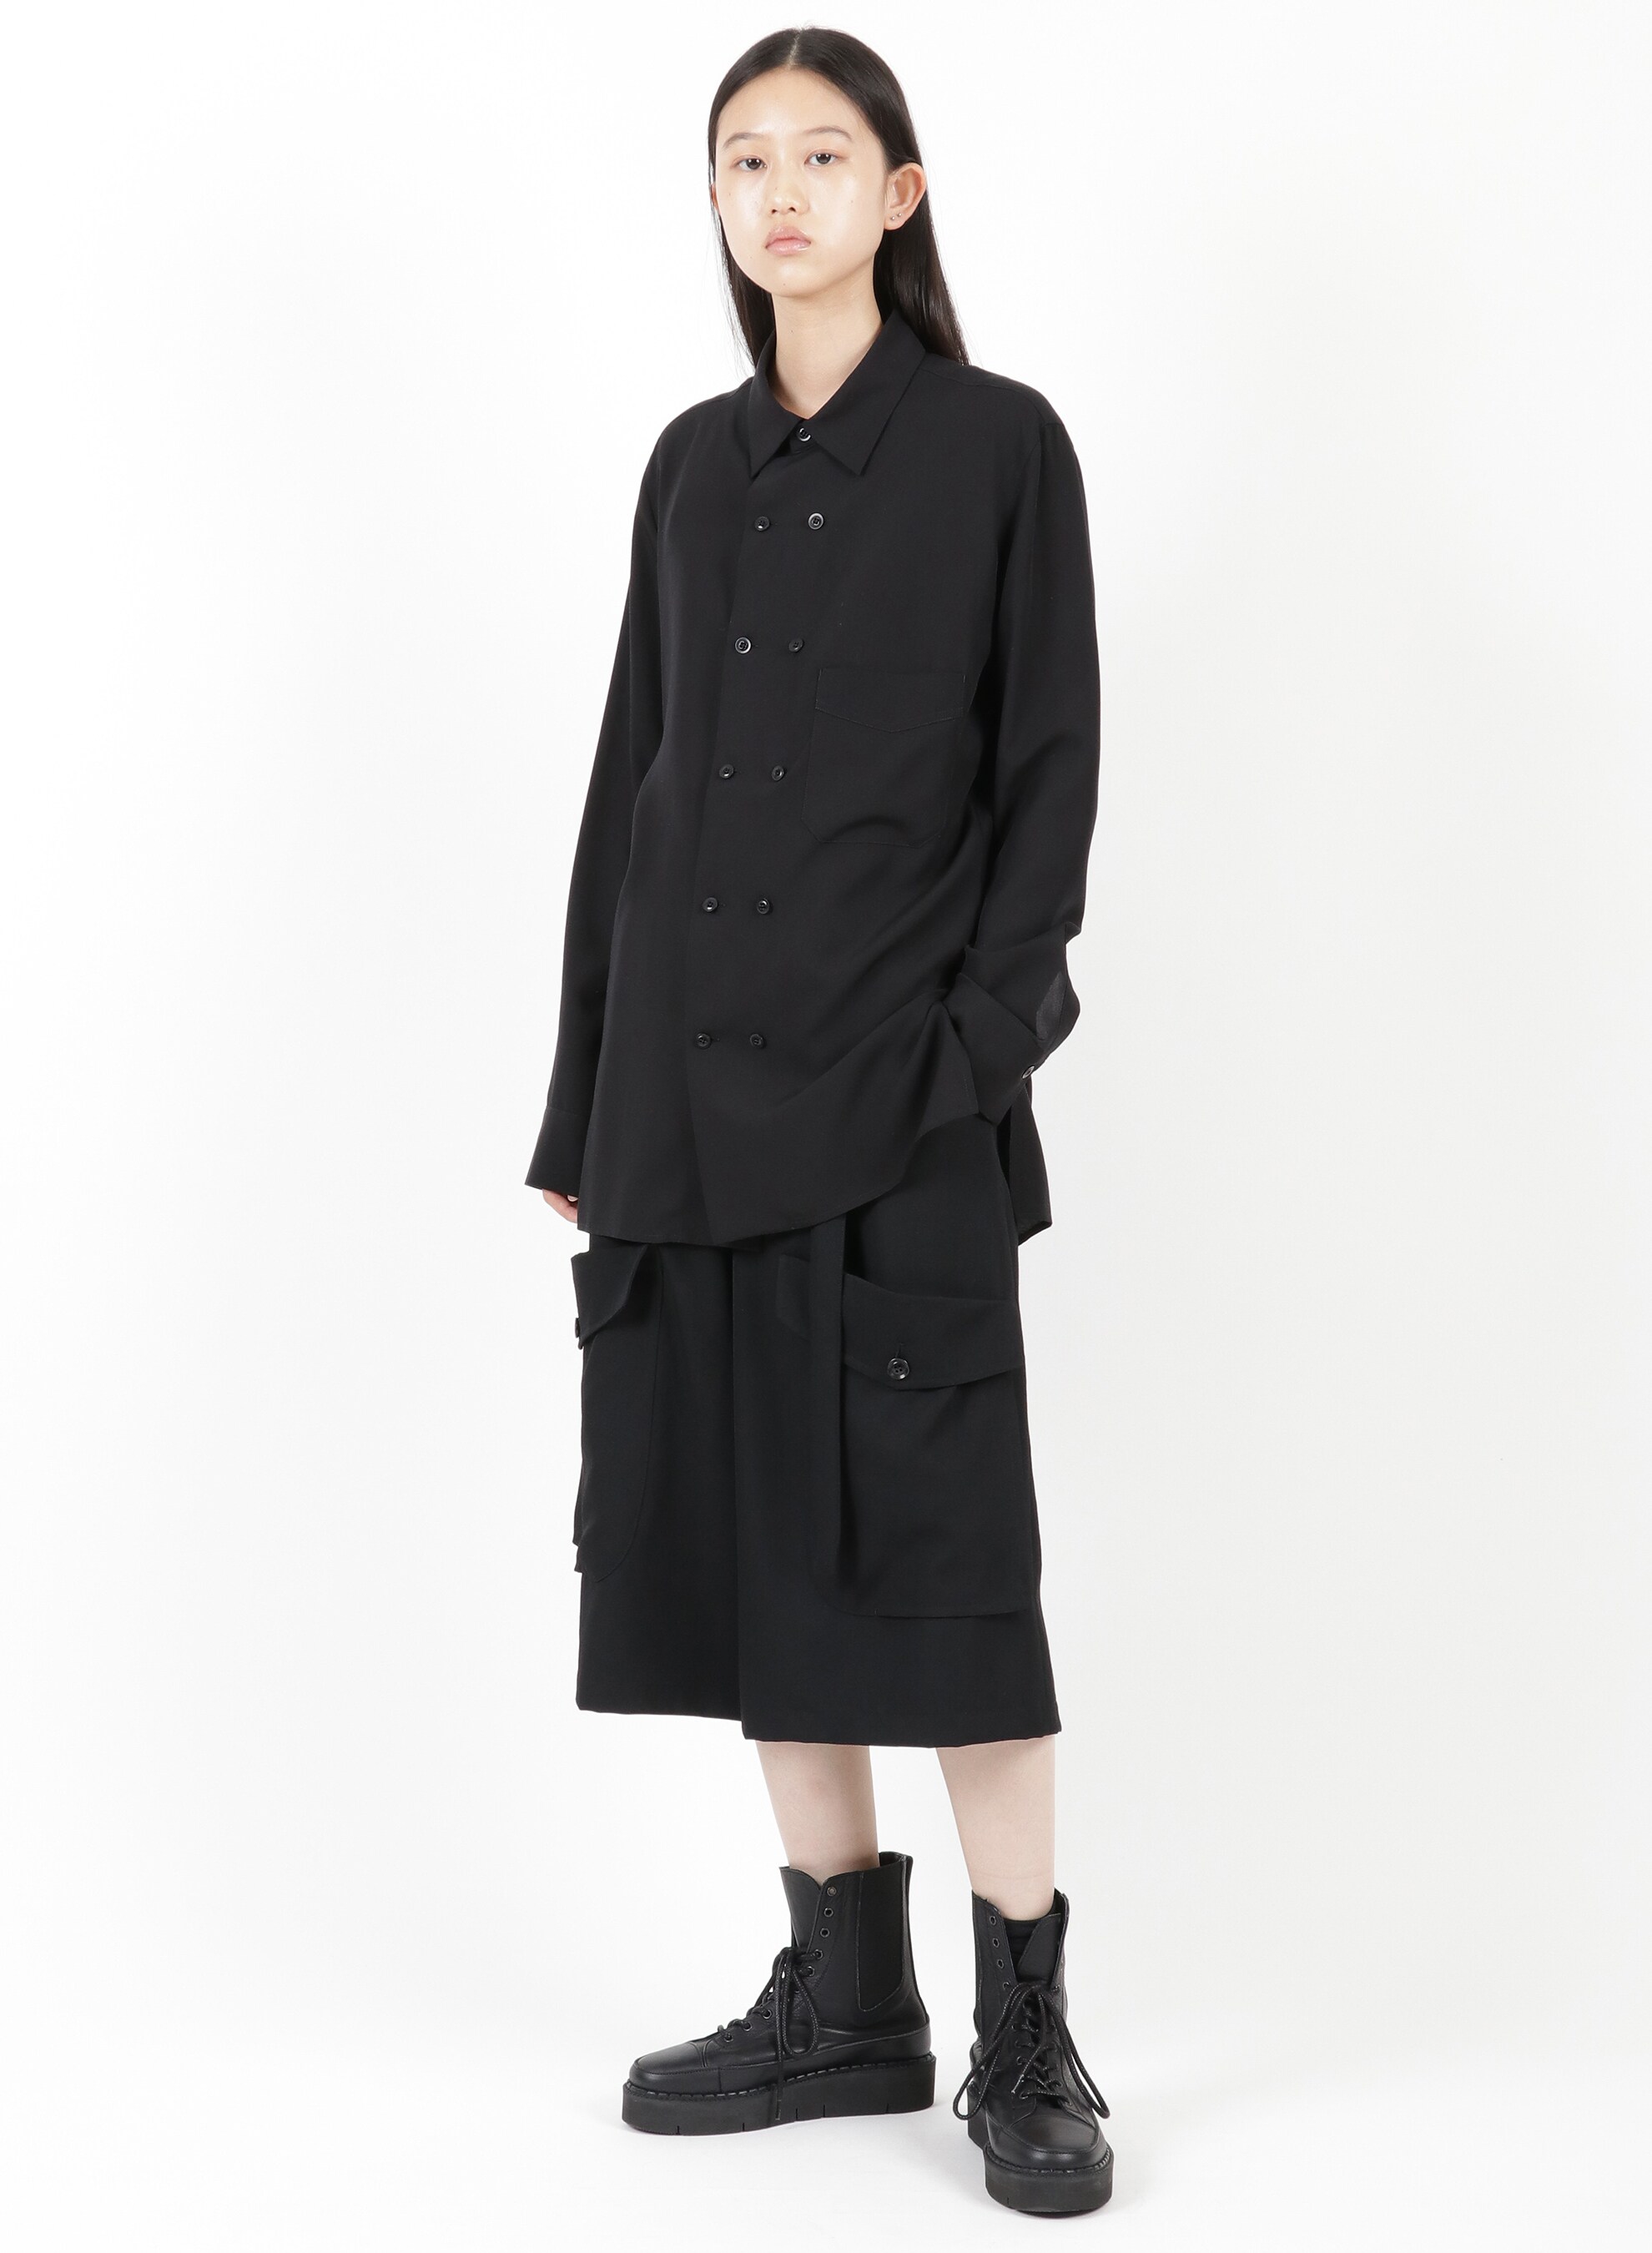 CELLULOSE POPLIN FRONT DOUBLE SHIRT